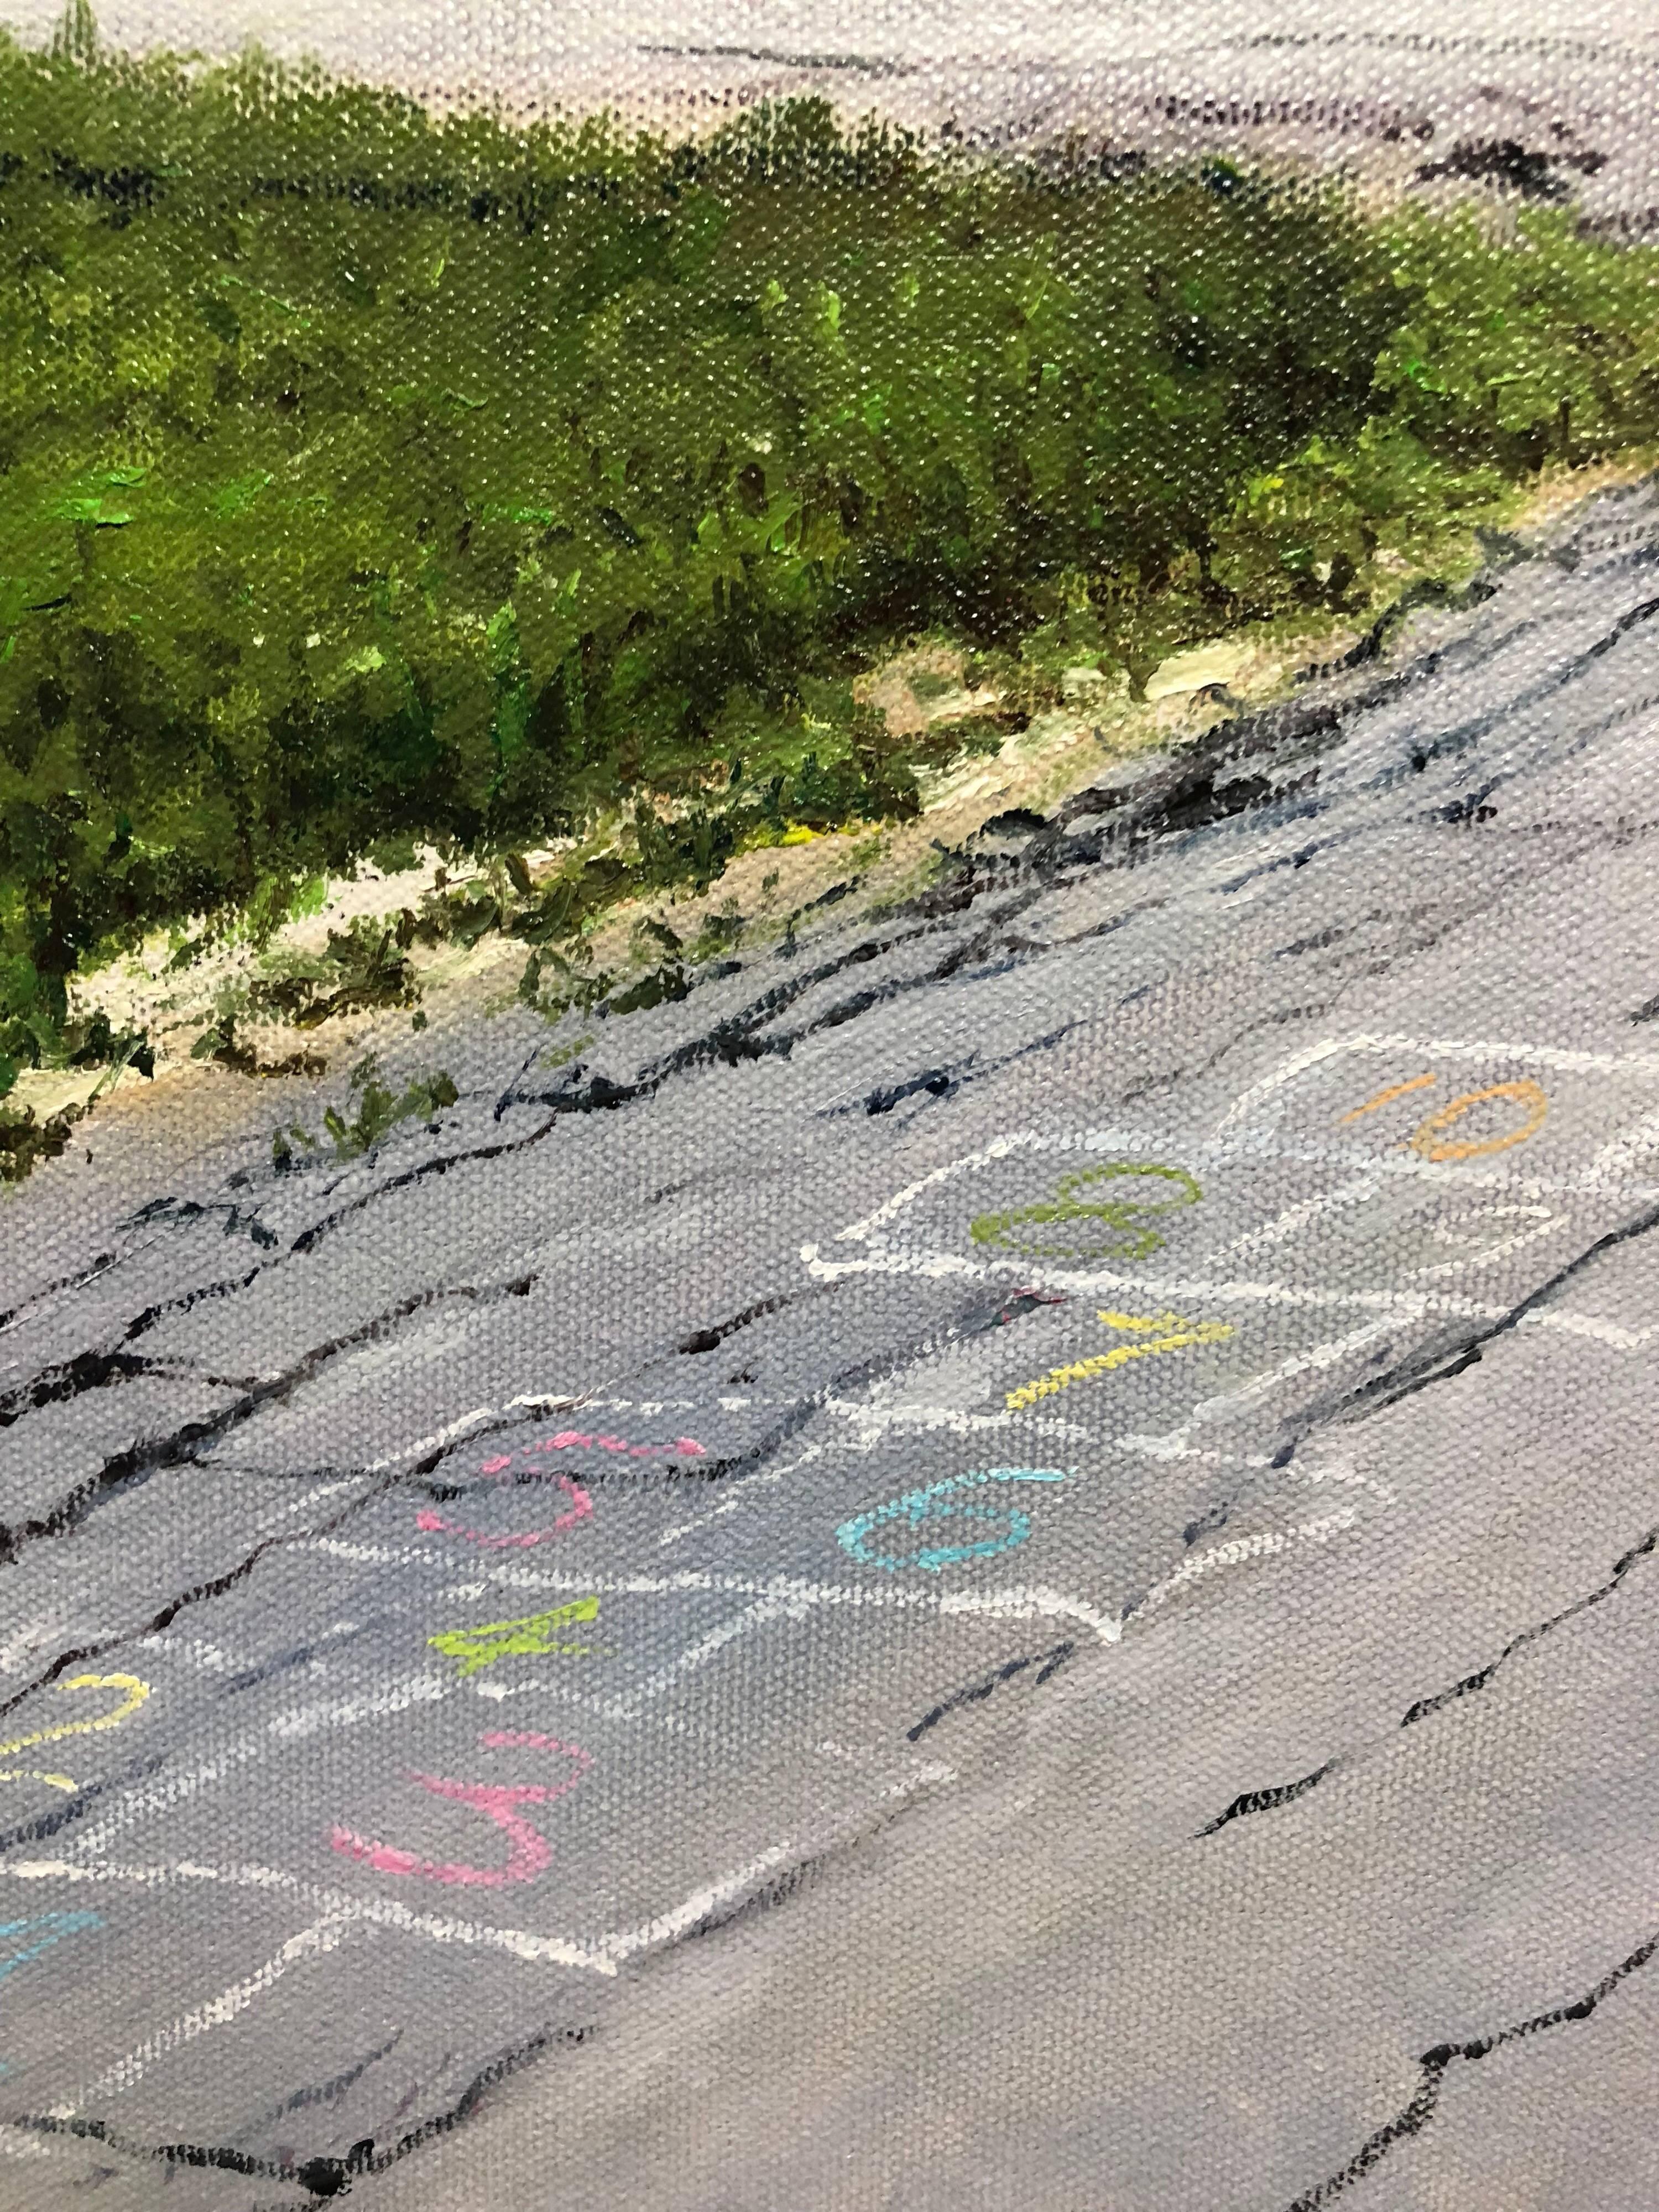 Hopscotch - Painting by Brian Kliewer